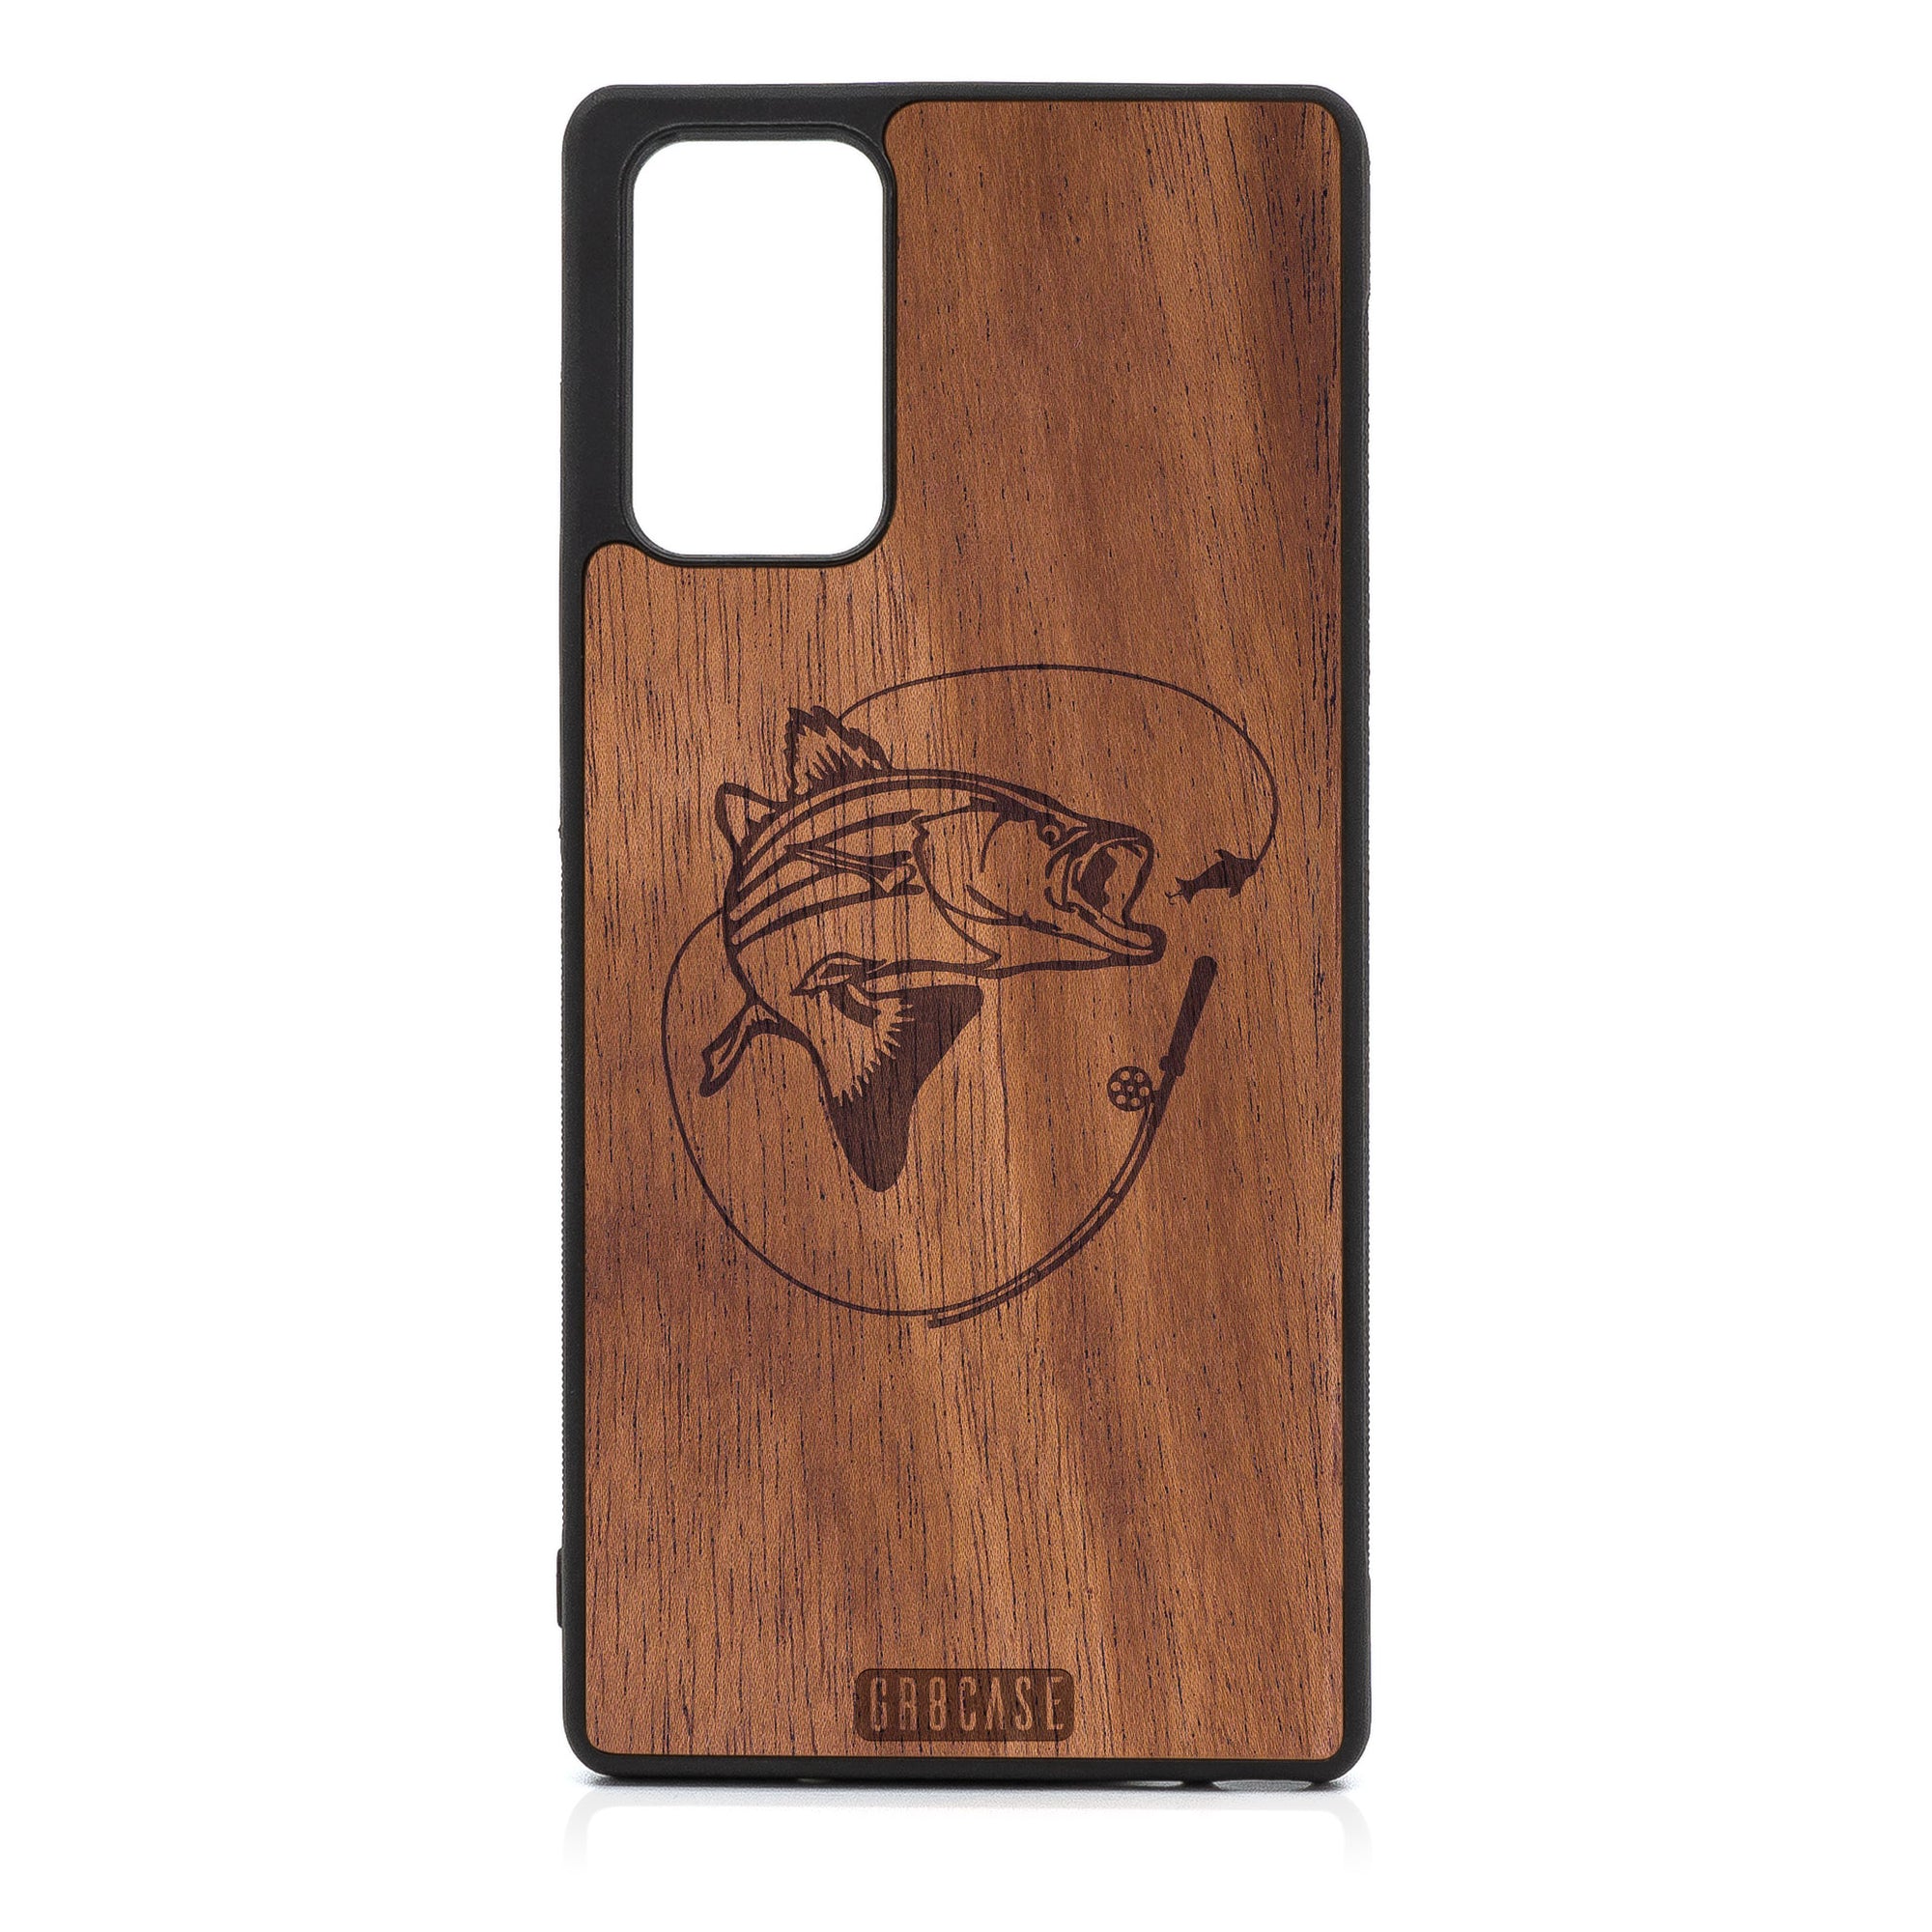 Fish and Reel Design Wood Case For Samsung Galaxy Note 20